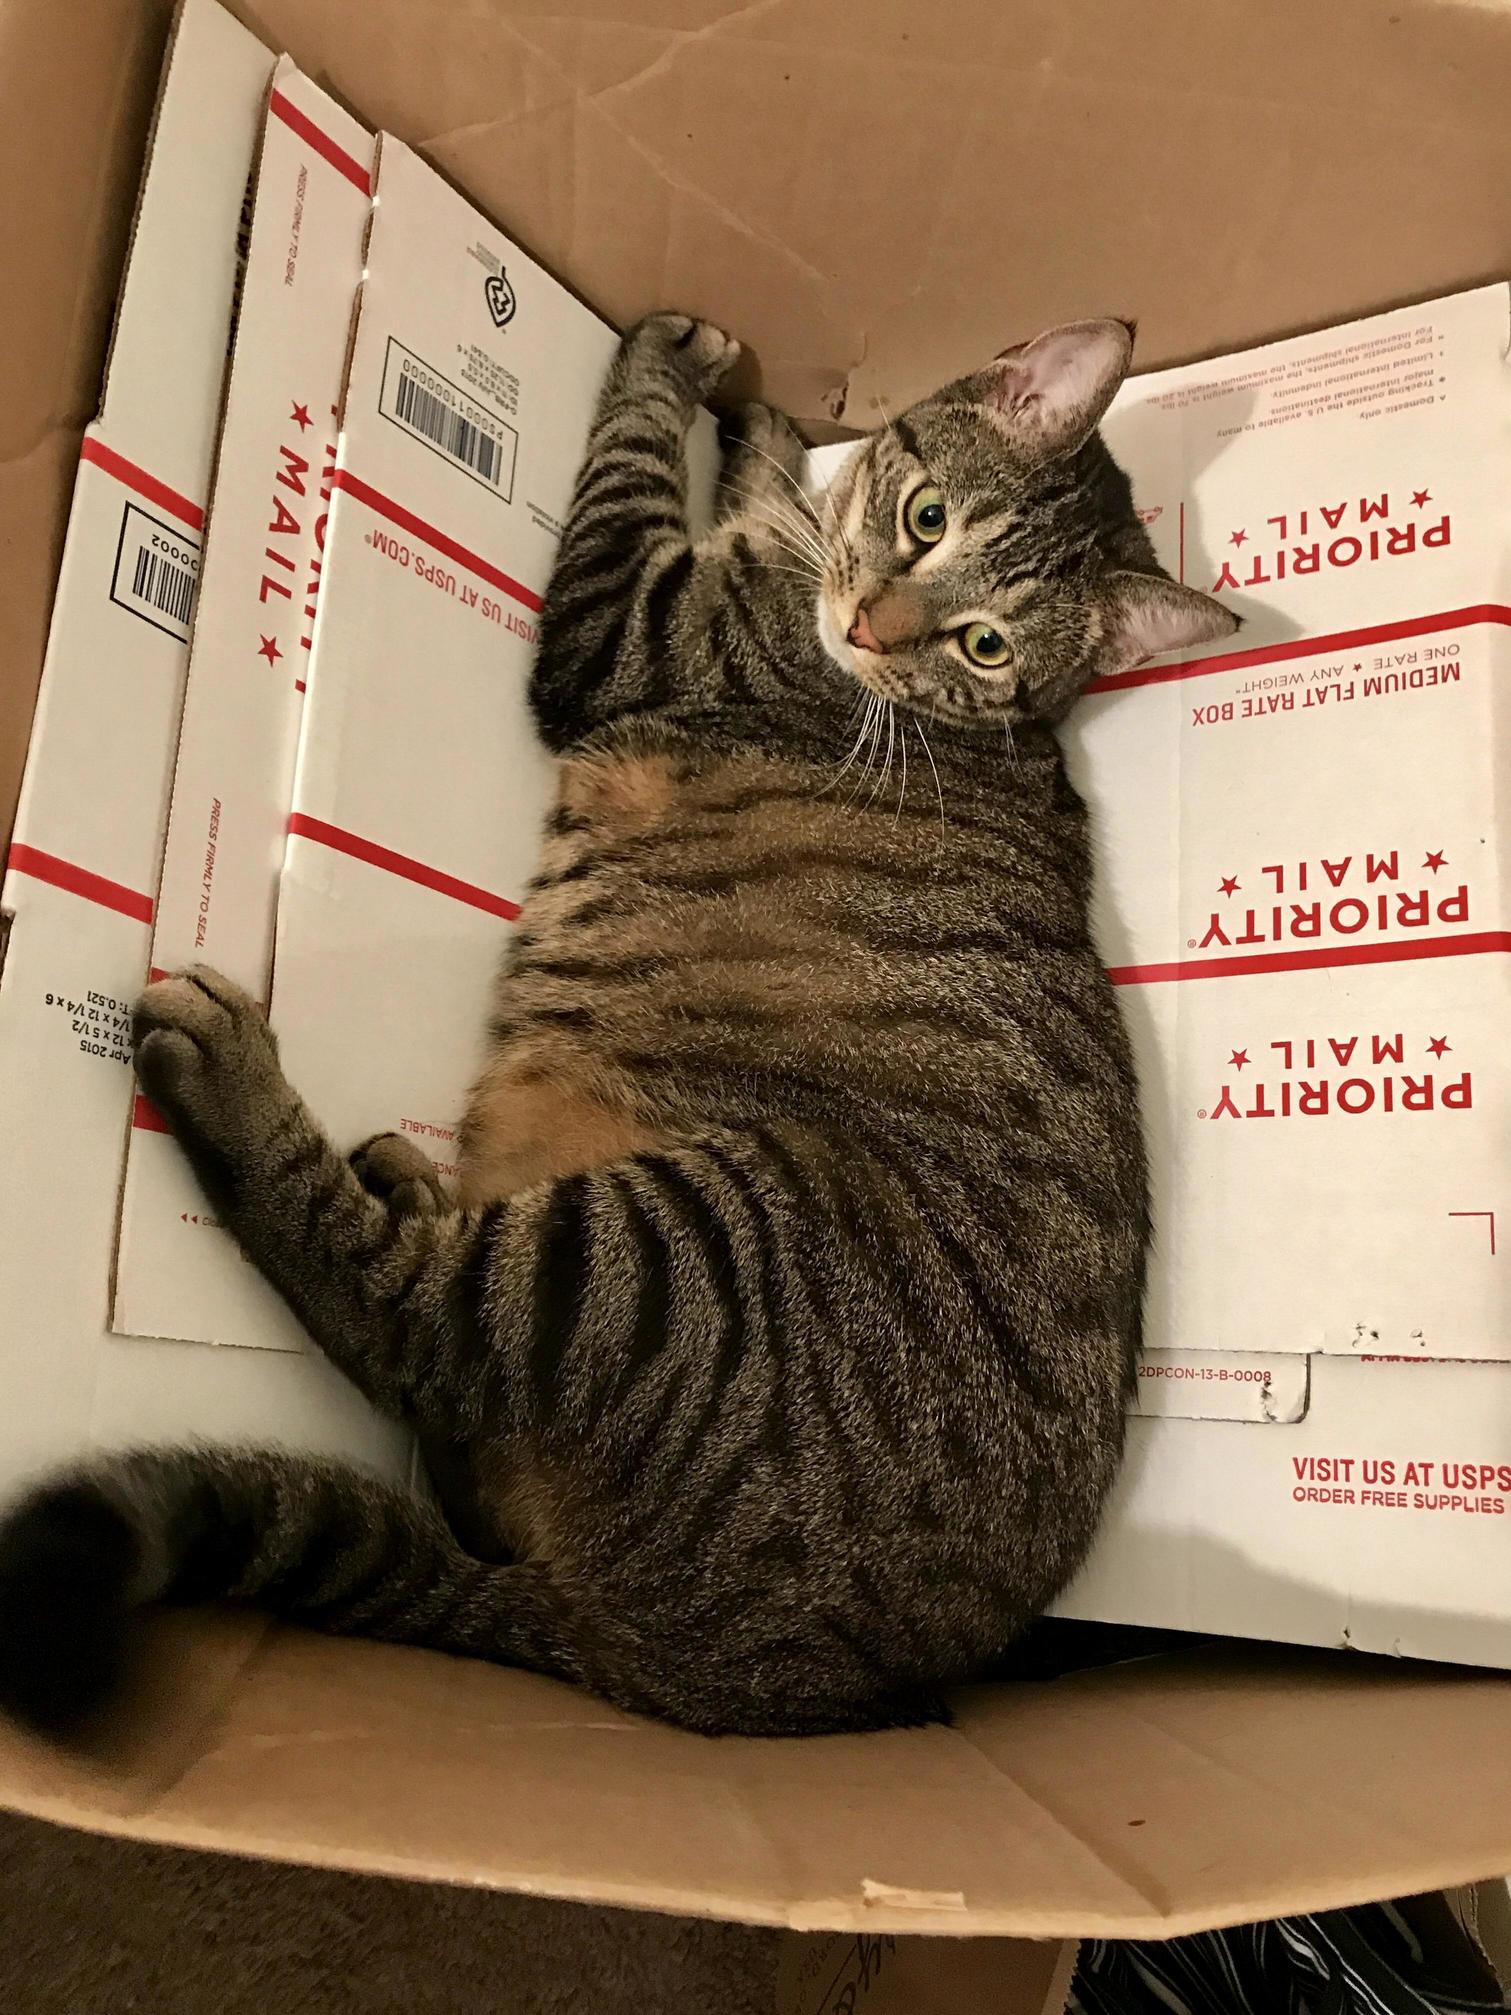 Free shipping but cat not included